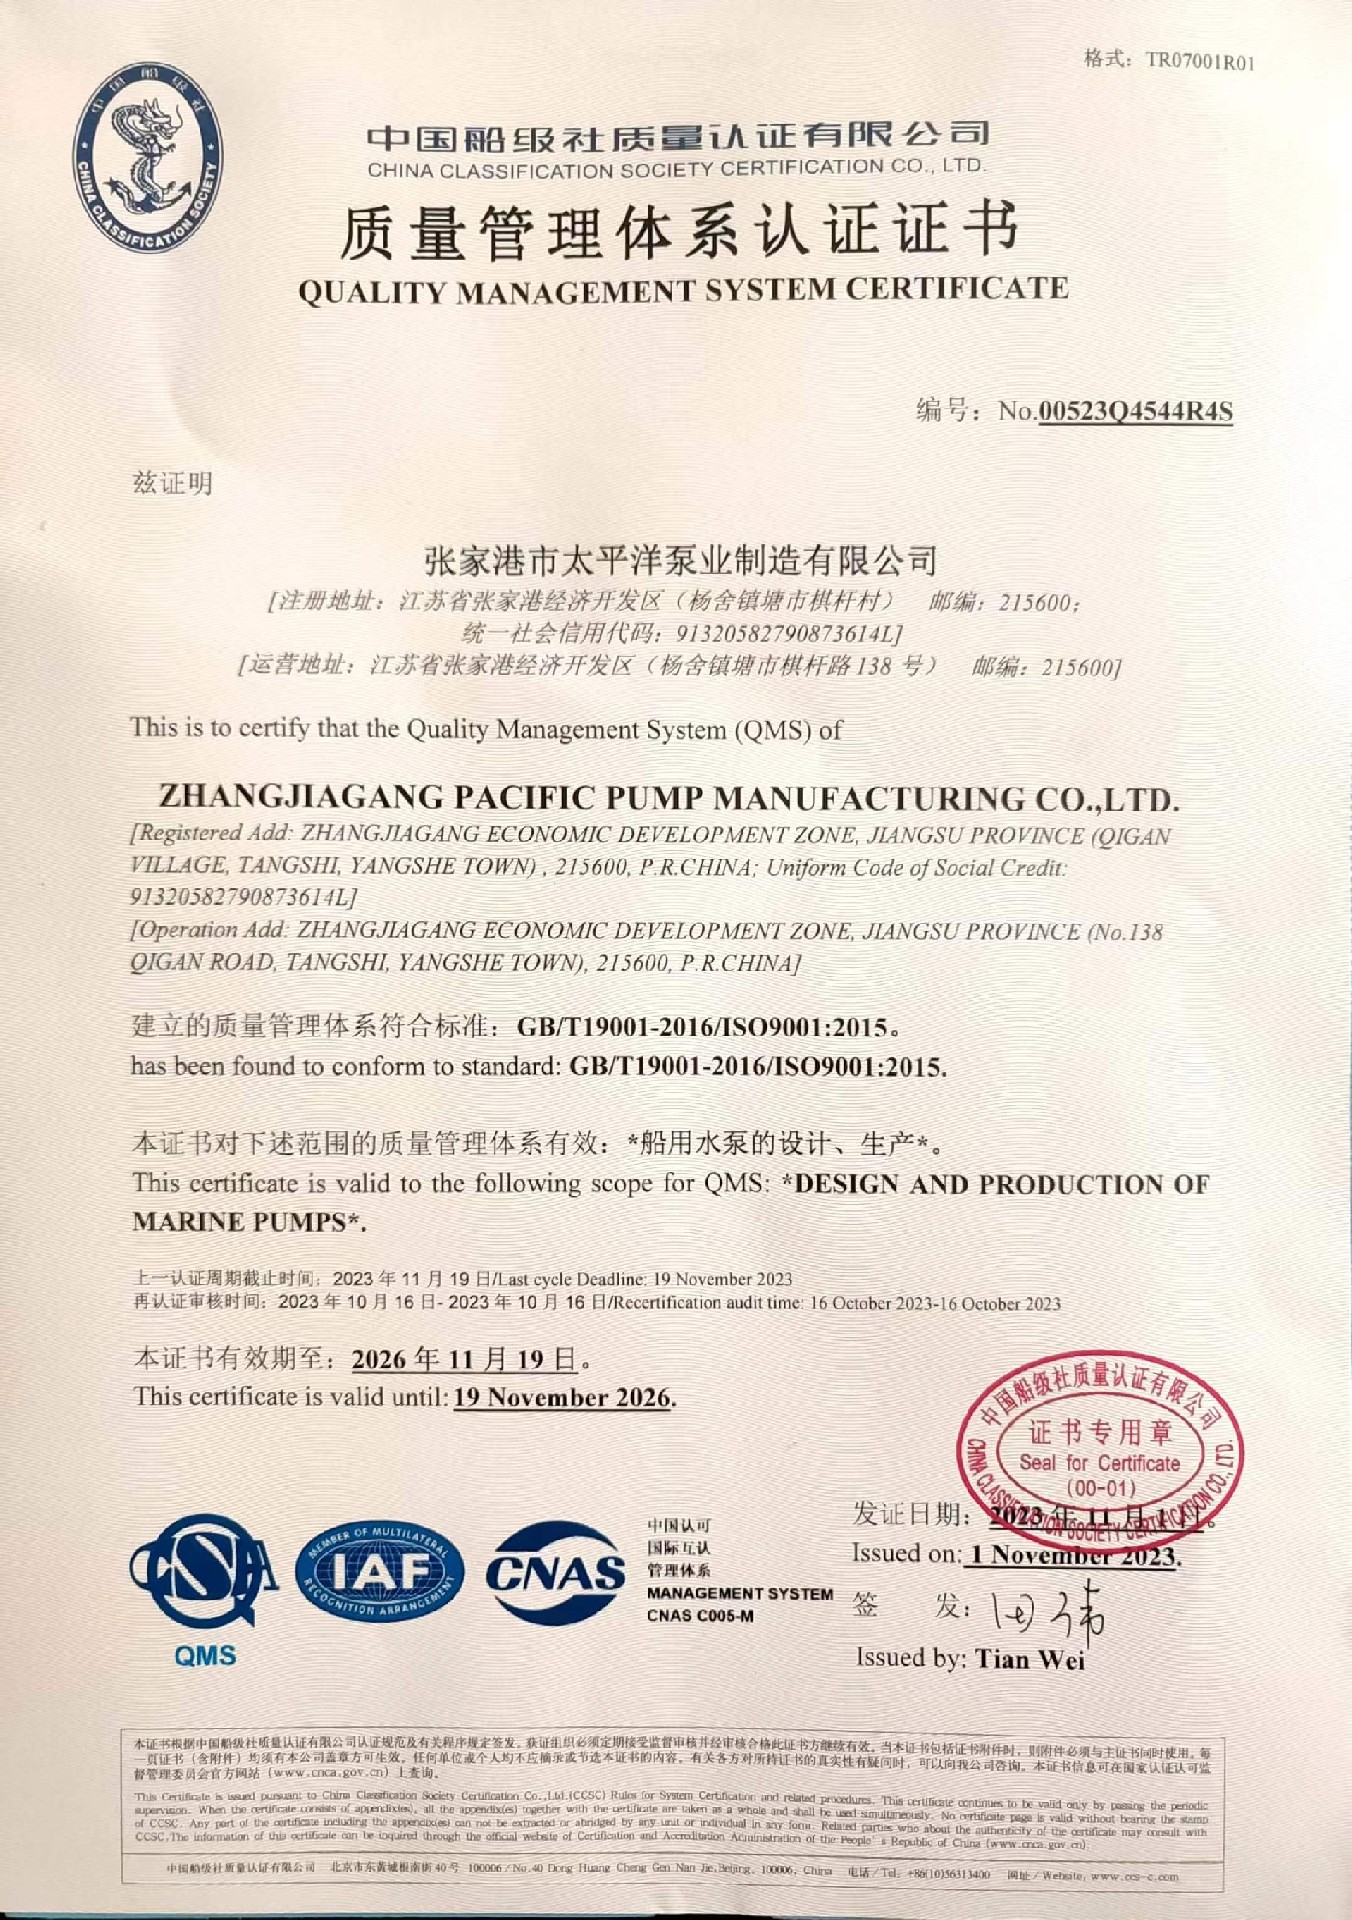 China classification society certification company quality management system certification